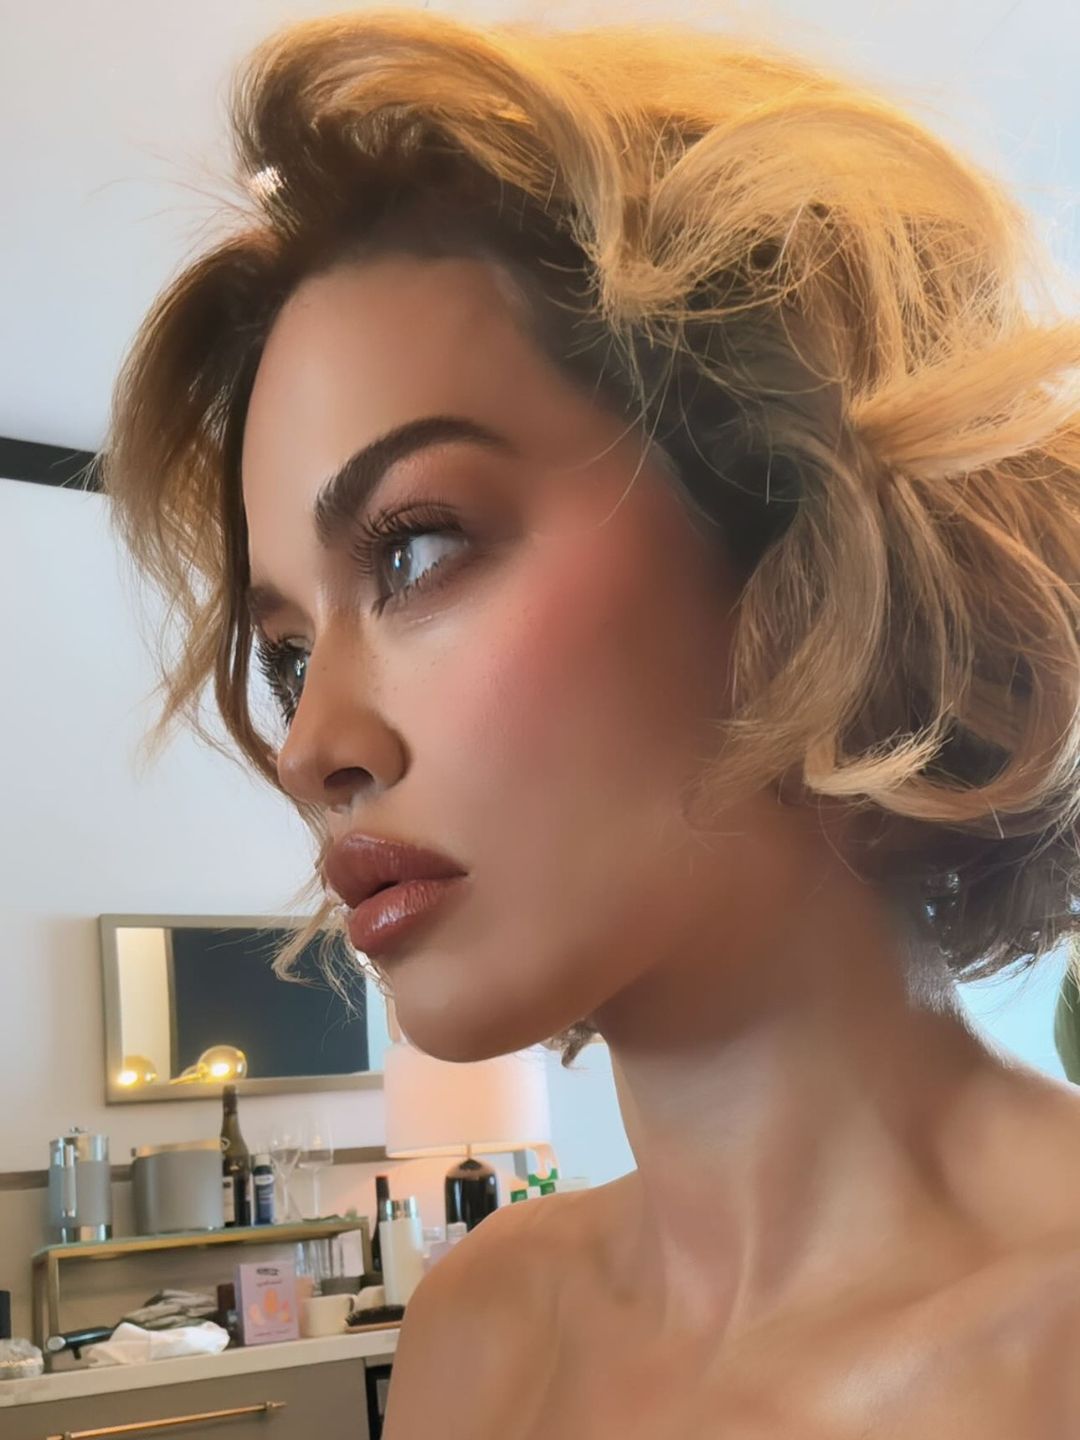 Rita Ora getting ready before the launch of her haircare brand